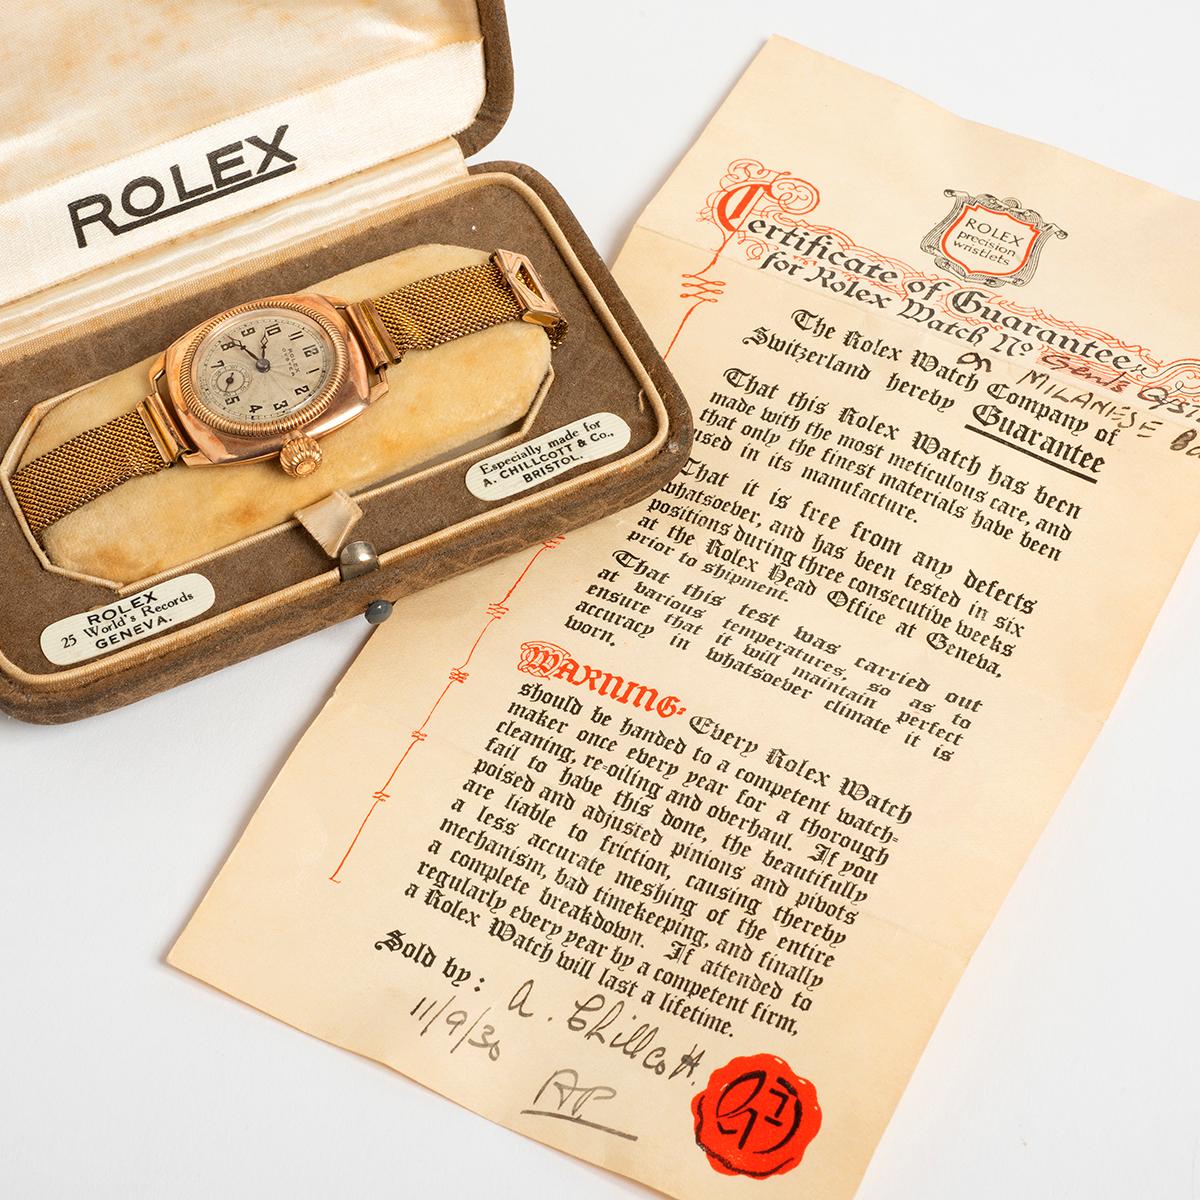 Rolex invented the first waterproof wristwatch, the Oyster. This is a very early example of such a watch, a reference 1925 and is incredibly rare on its own, but even more so, as it comes with its original box and paperwork. Featuring a beautiful